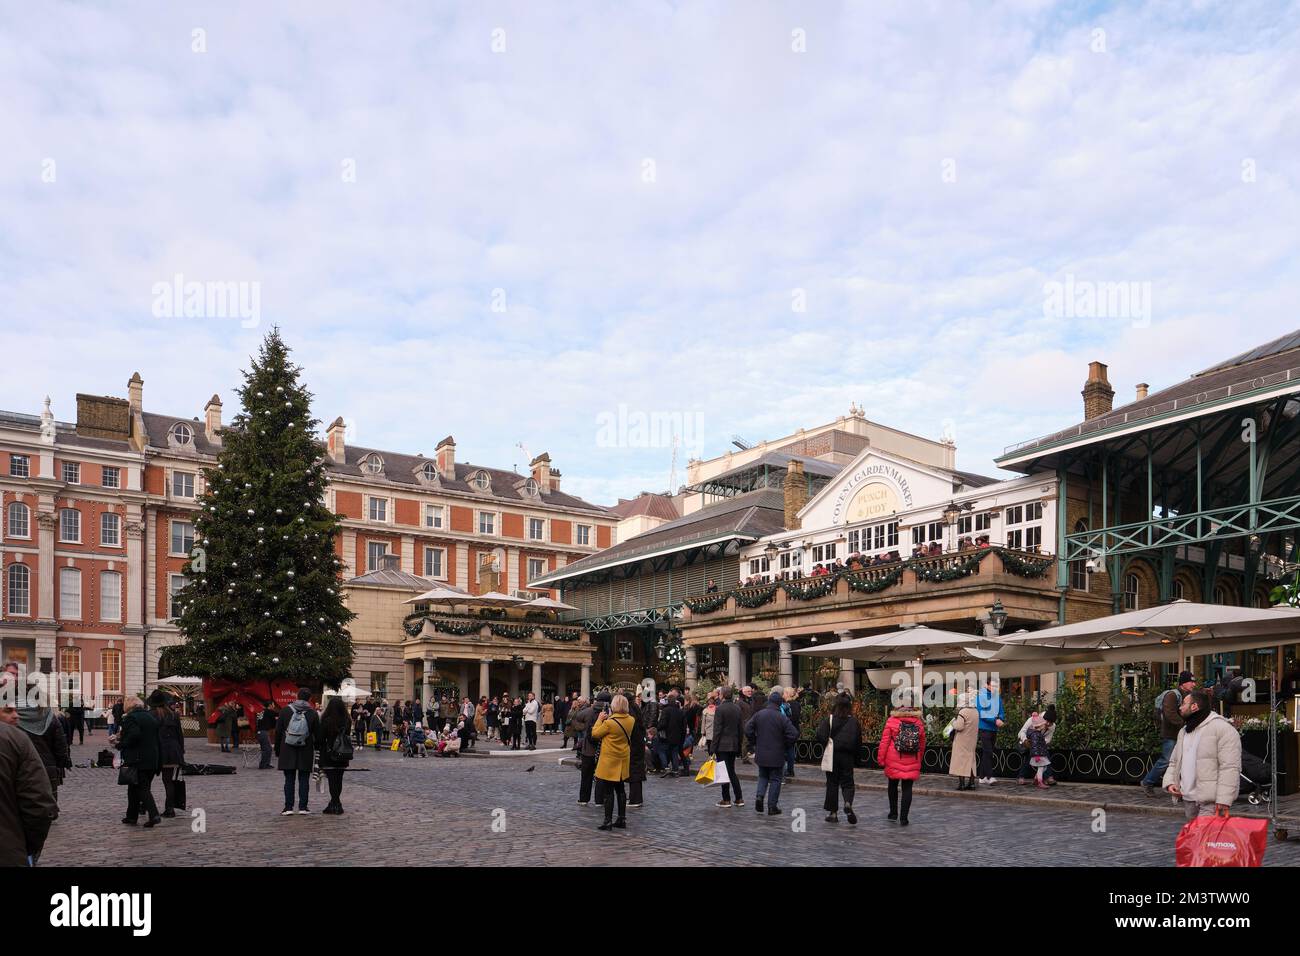 View of Covent Garden Christmas tree at Covent Garden Market, London, United Kingdom. Stock Photo